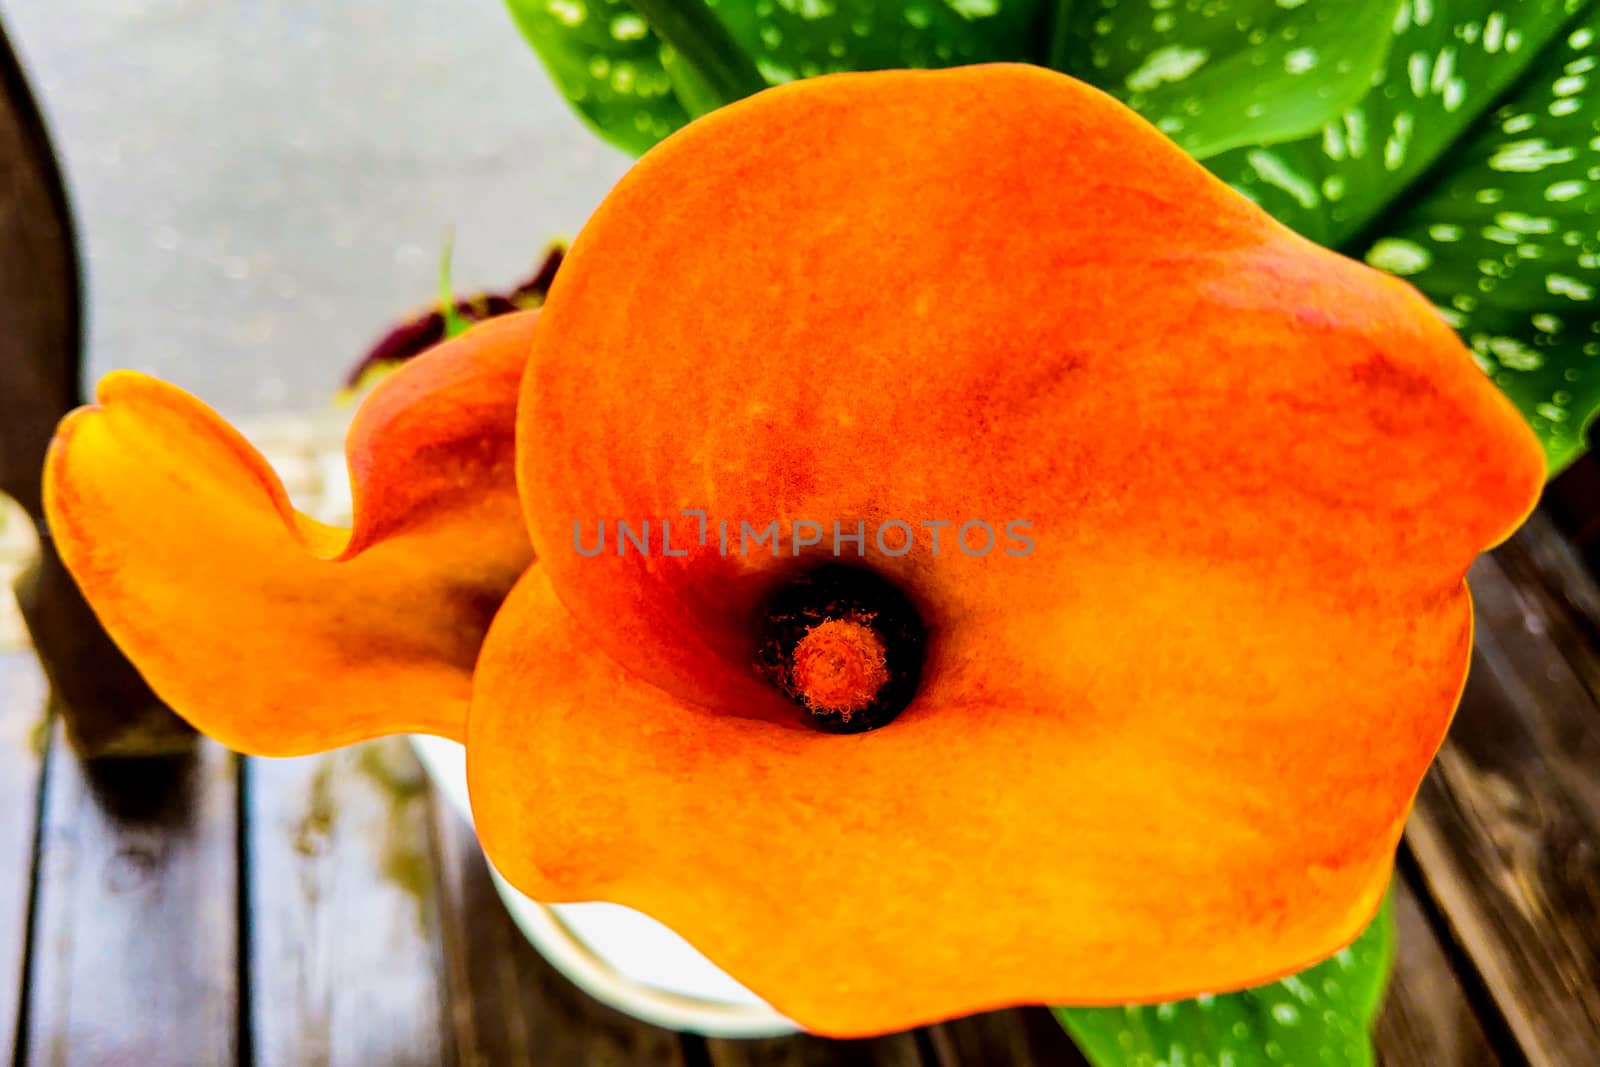 Calla lily,many beautiful orange flowers blooming in the garden in spring,arum lily,gold calla. by kip02kas